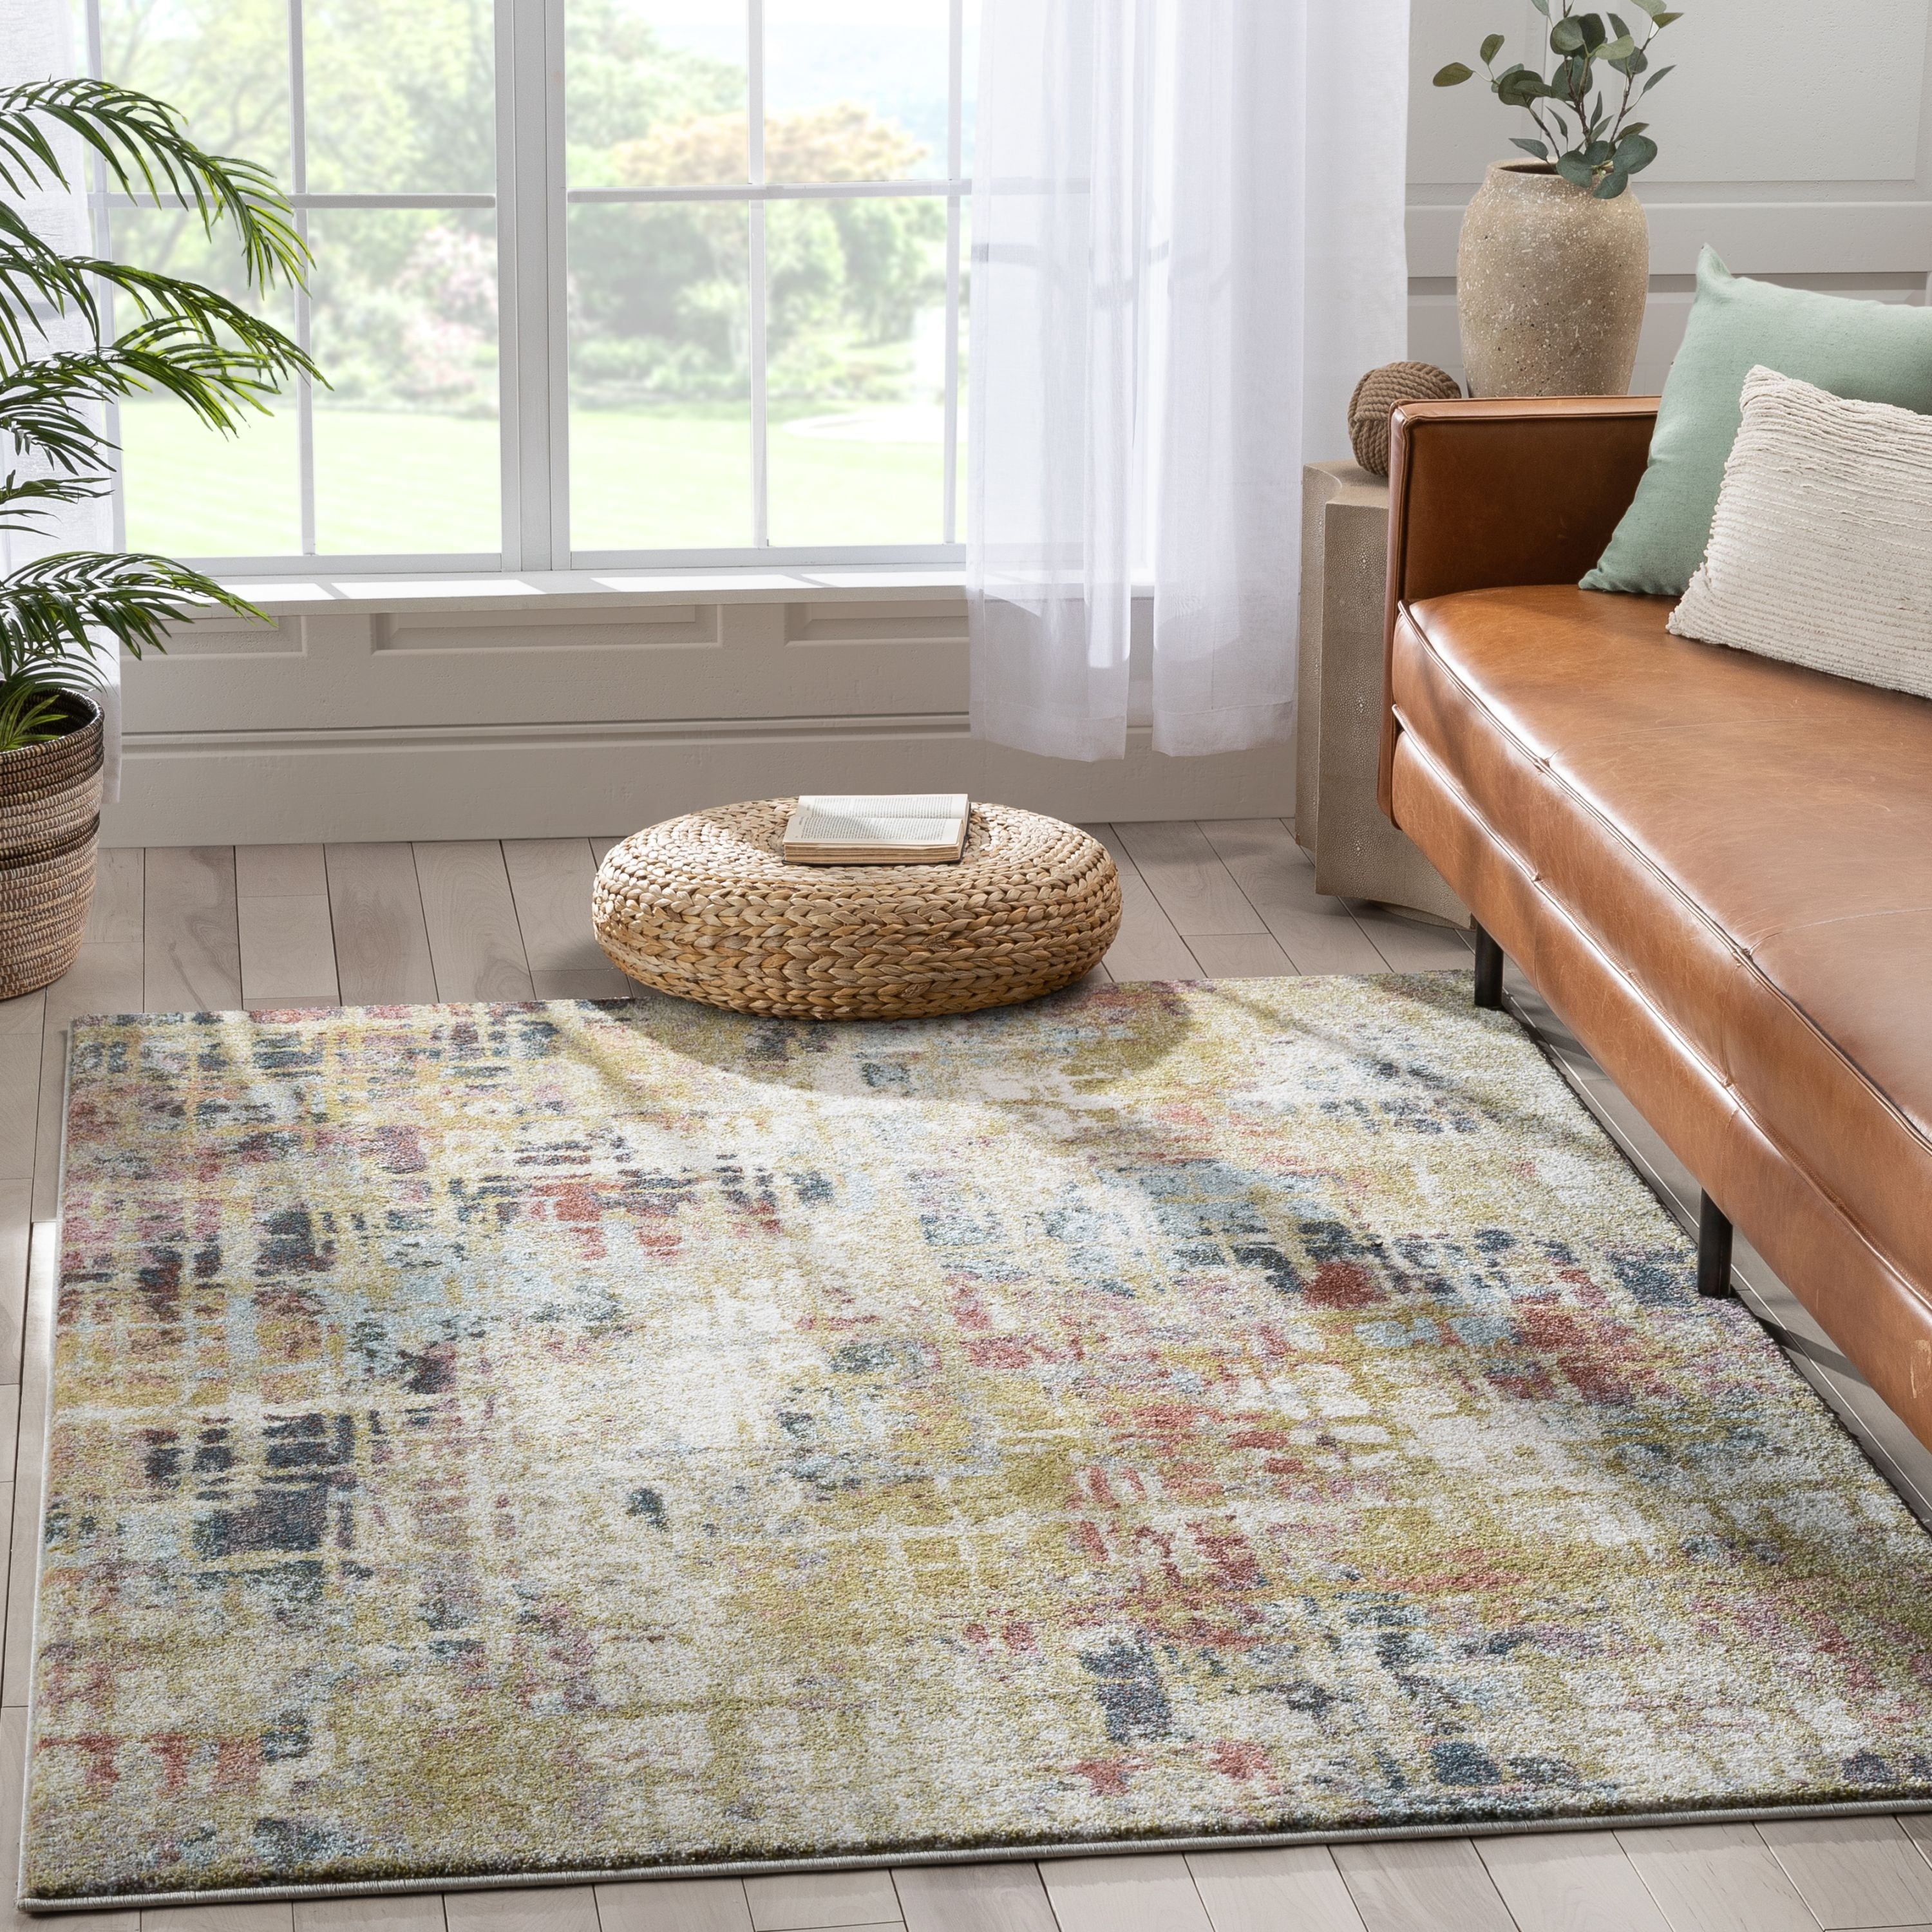 Hauteloom Liverpool Living Room, Bedroom Area Rug - Contemporary - Colorful - 5'3 x 7' - Blue, Grey, Off White